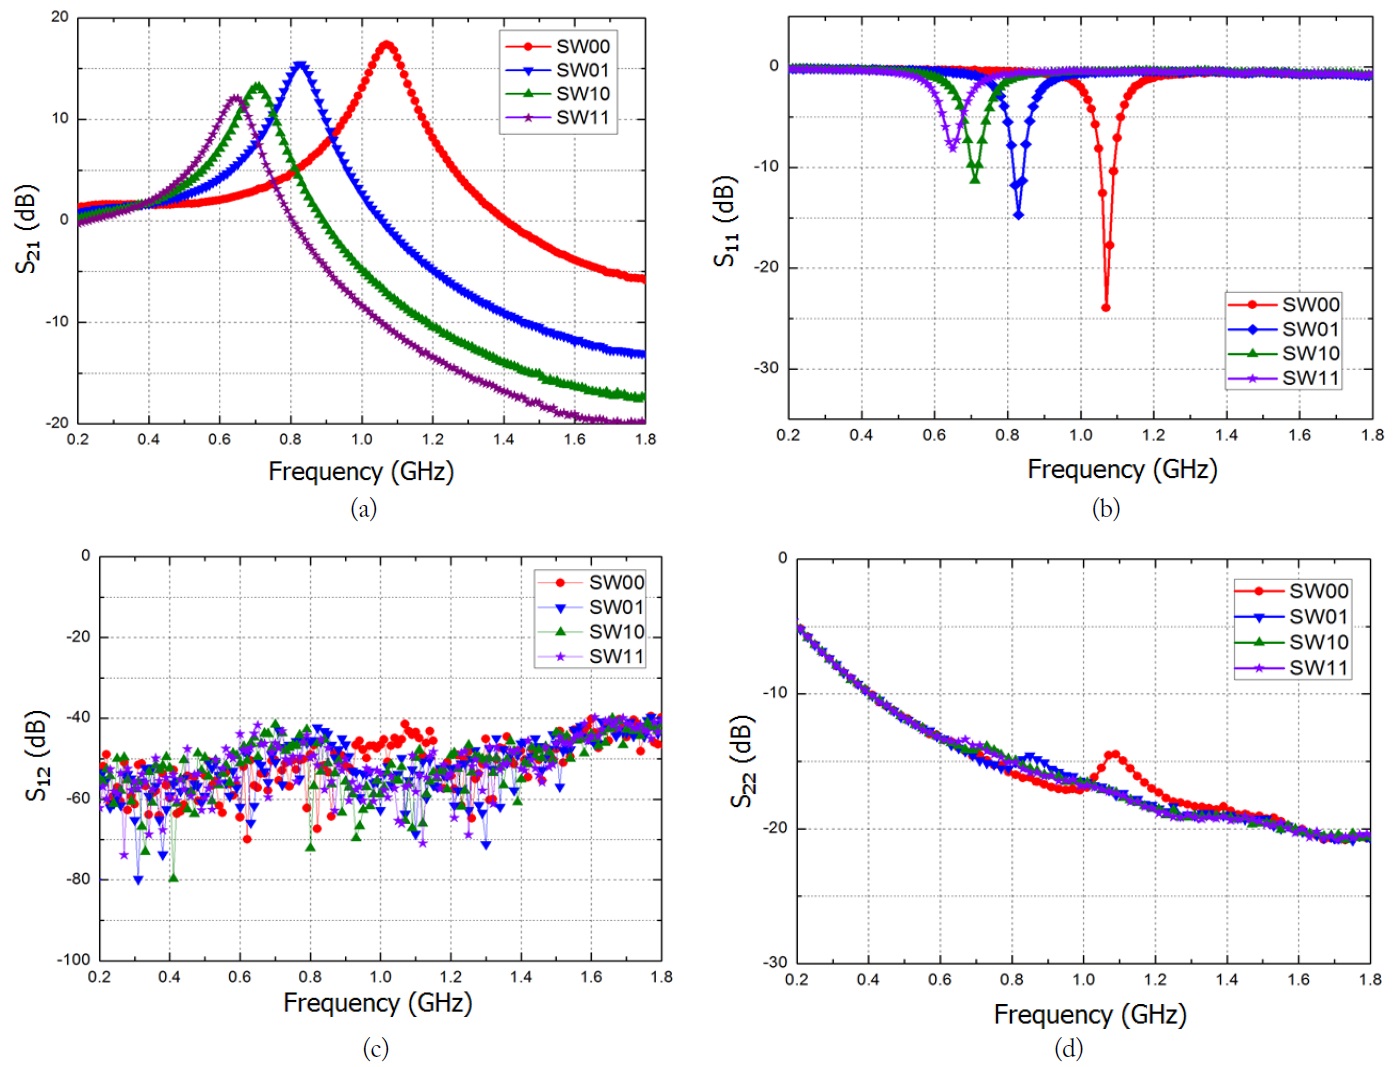 Measured S-parameters of the high Q series resonance low-noise amplifier (HQ-LNA): (a) S21, (b) S11, (c) S12, and (d) S22.